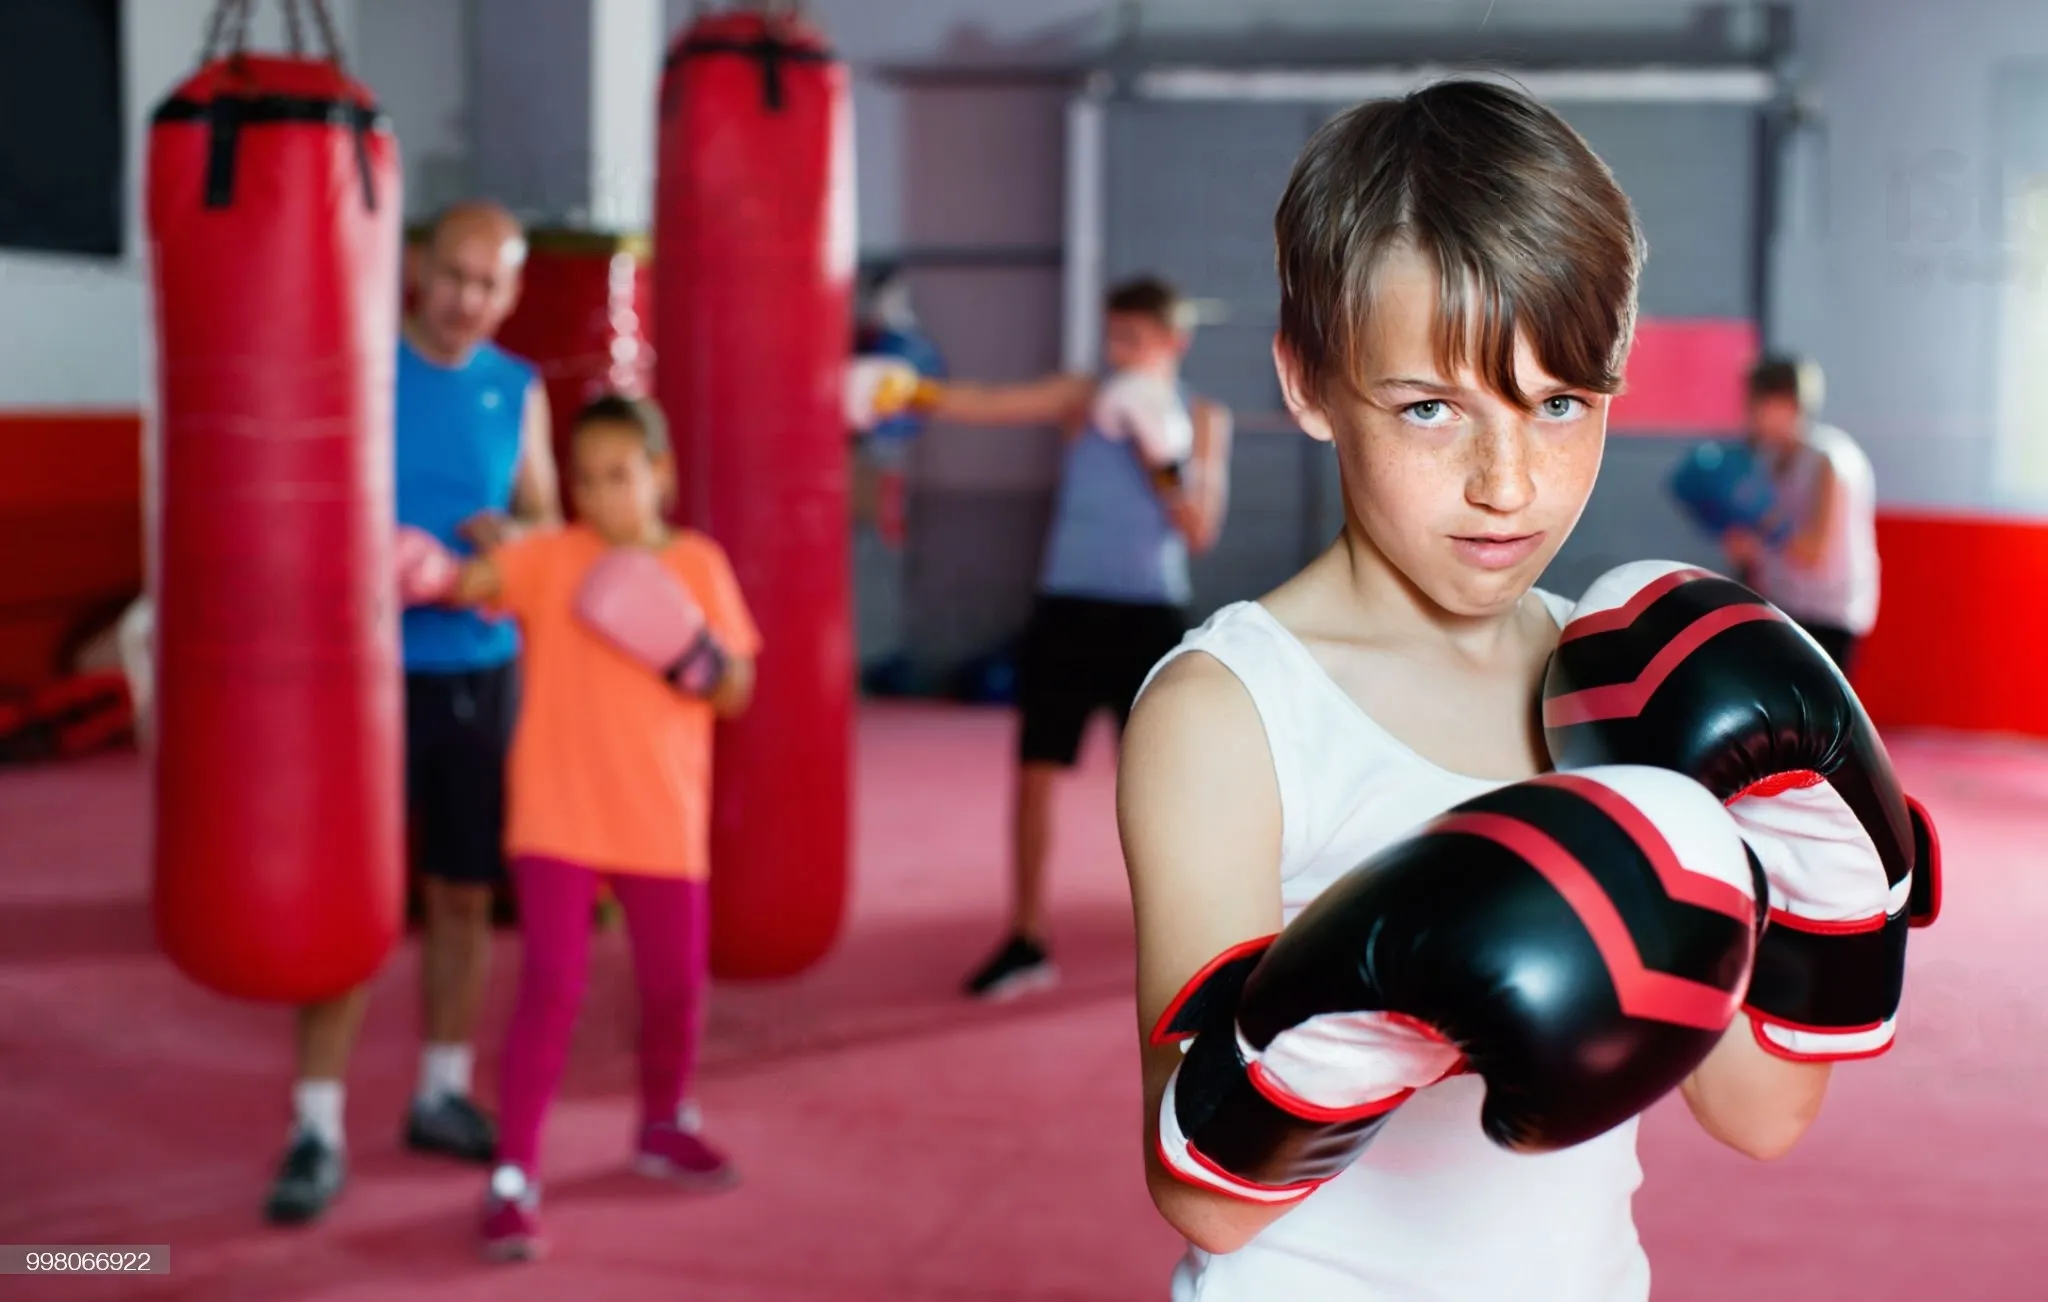 5 Boxing Workouts to Improve Your Strength and Endurance